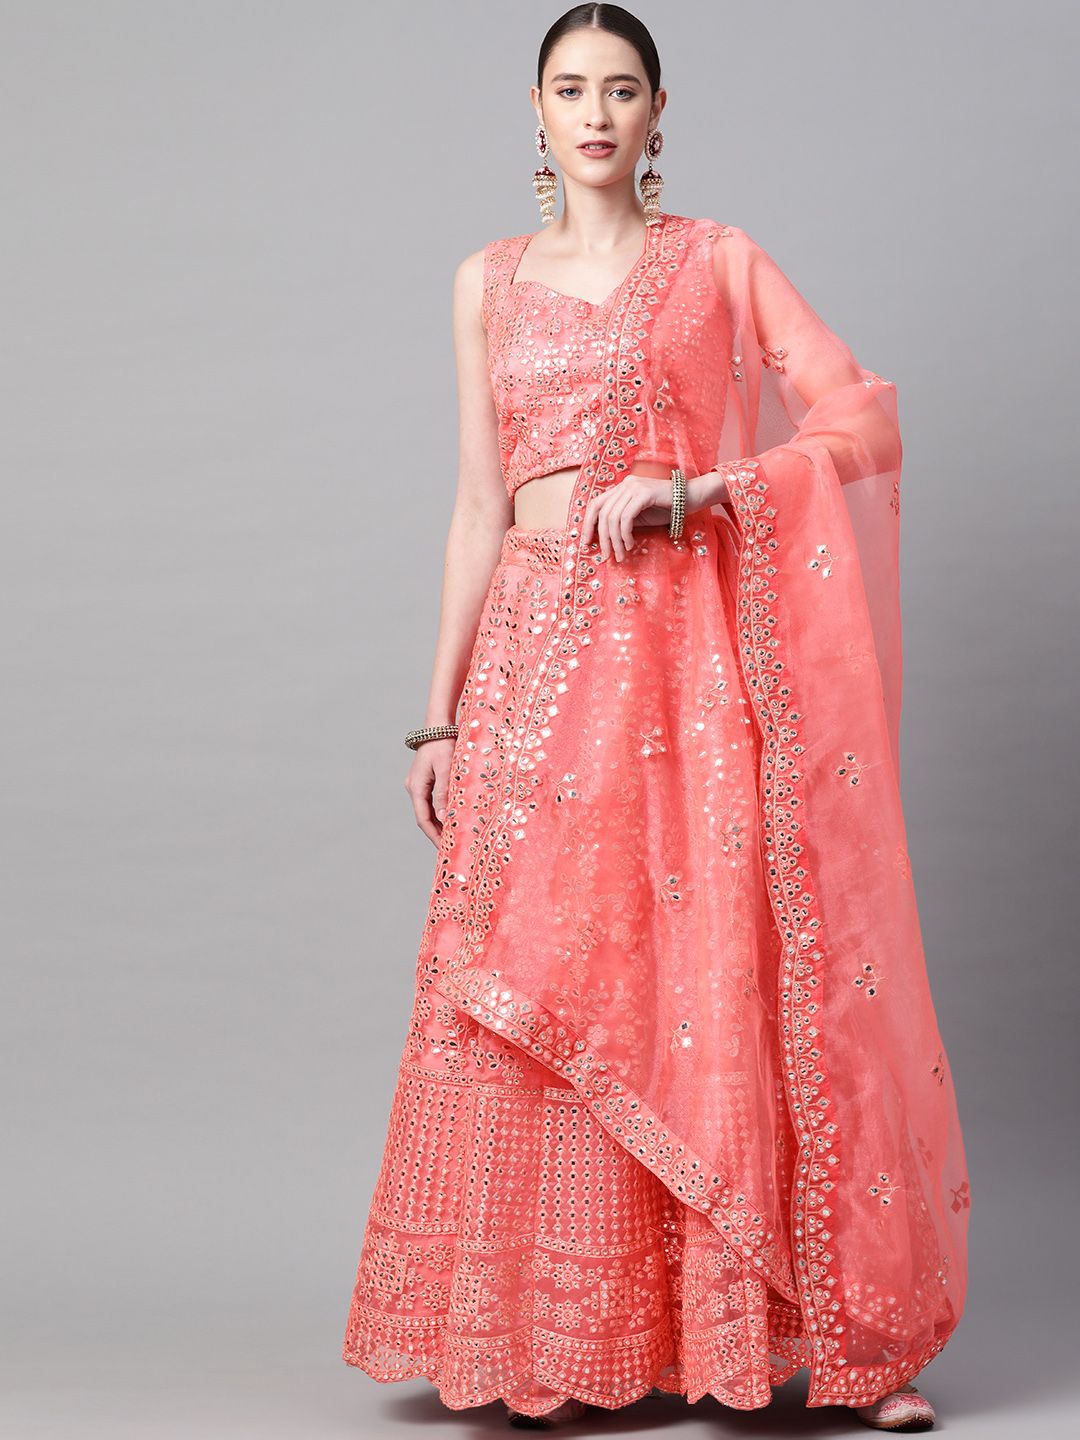 Readiprint Fashions Peach-Coloured Semi-Stitched Lehenga & Unstitched Blouse With Dupatta Price in India